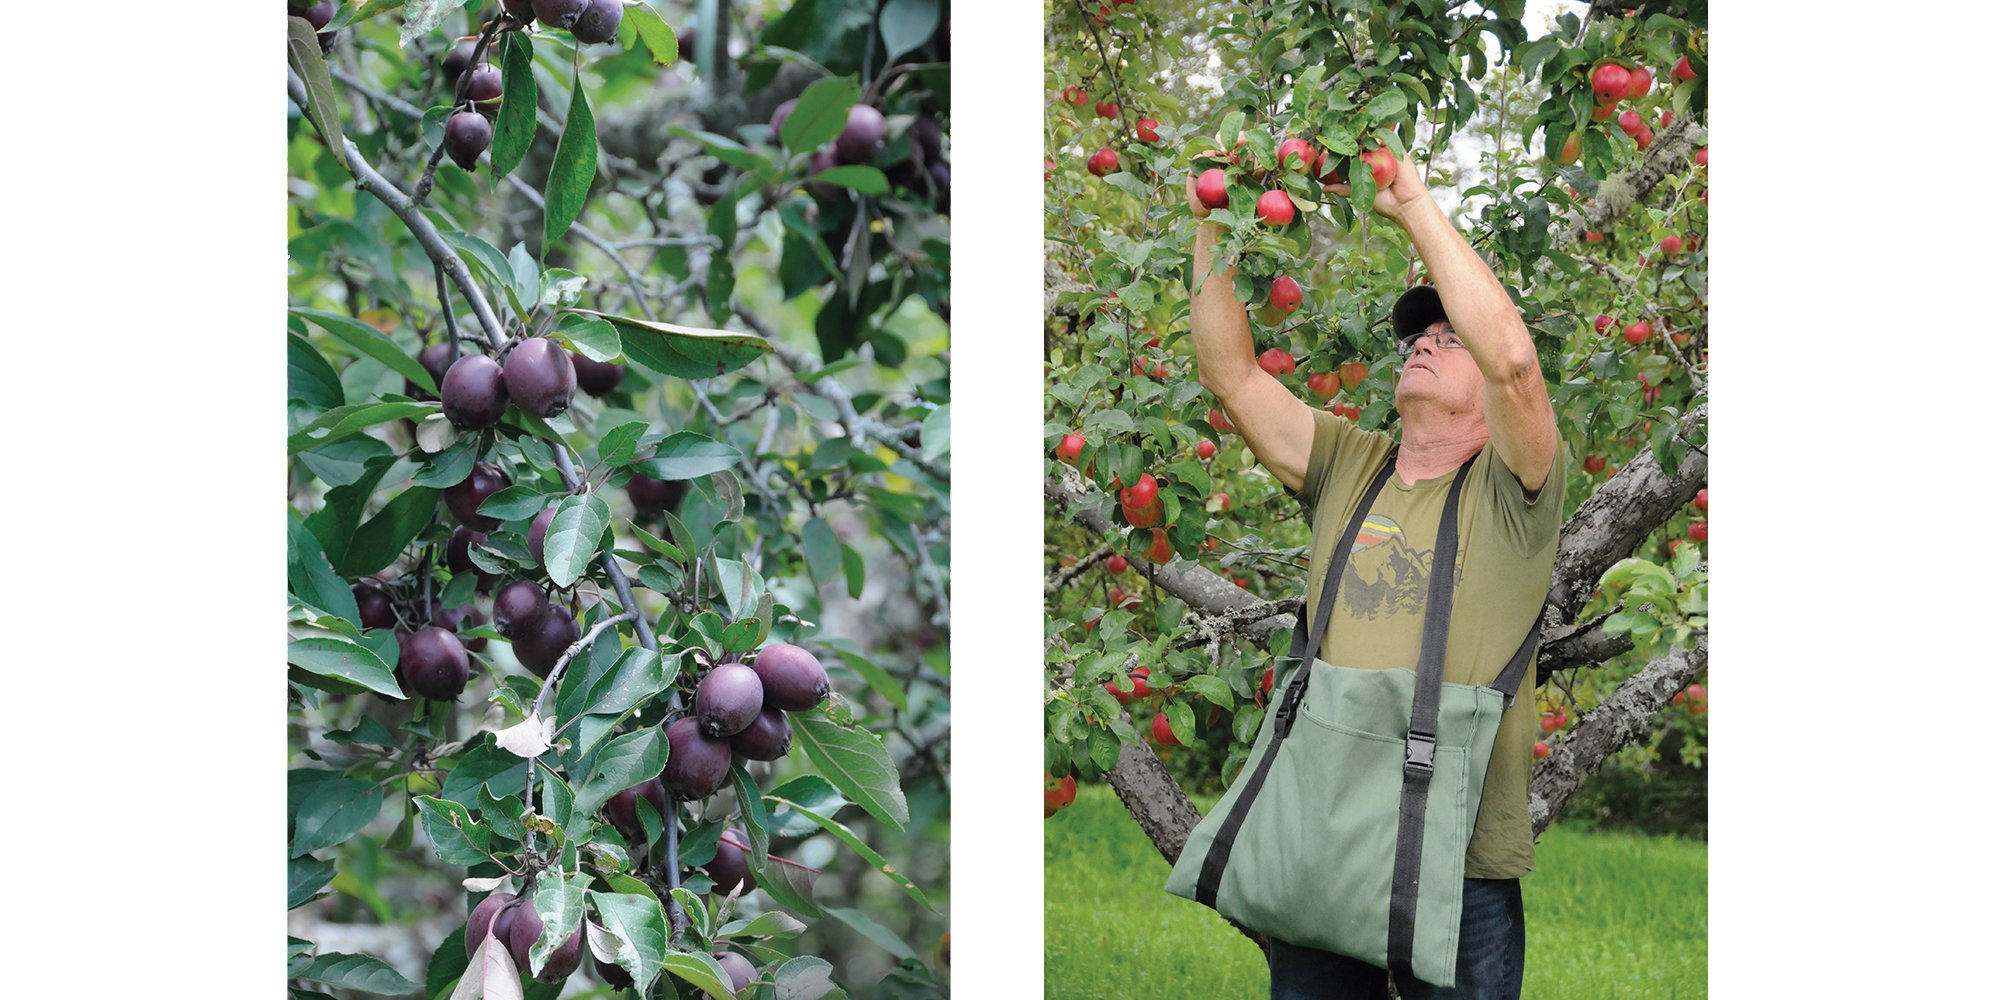 An image of apples growing on tress and an image of the of the book, Hardy Apples author, Robert Osborne picking apples